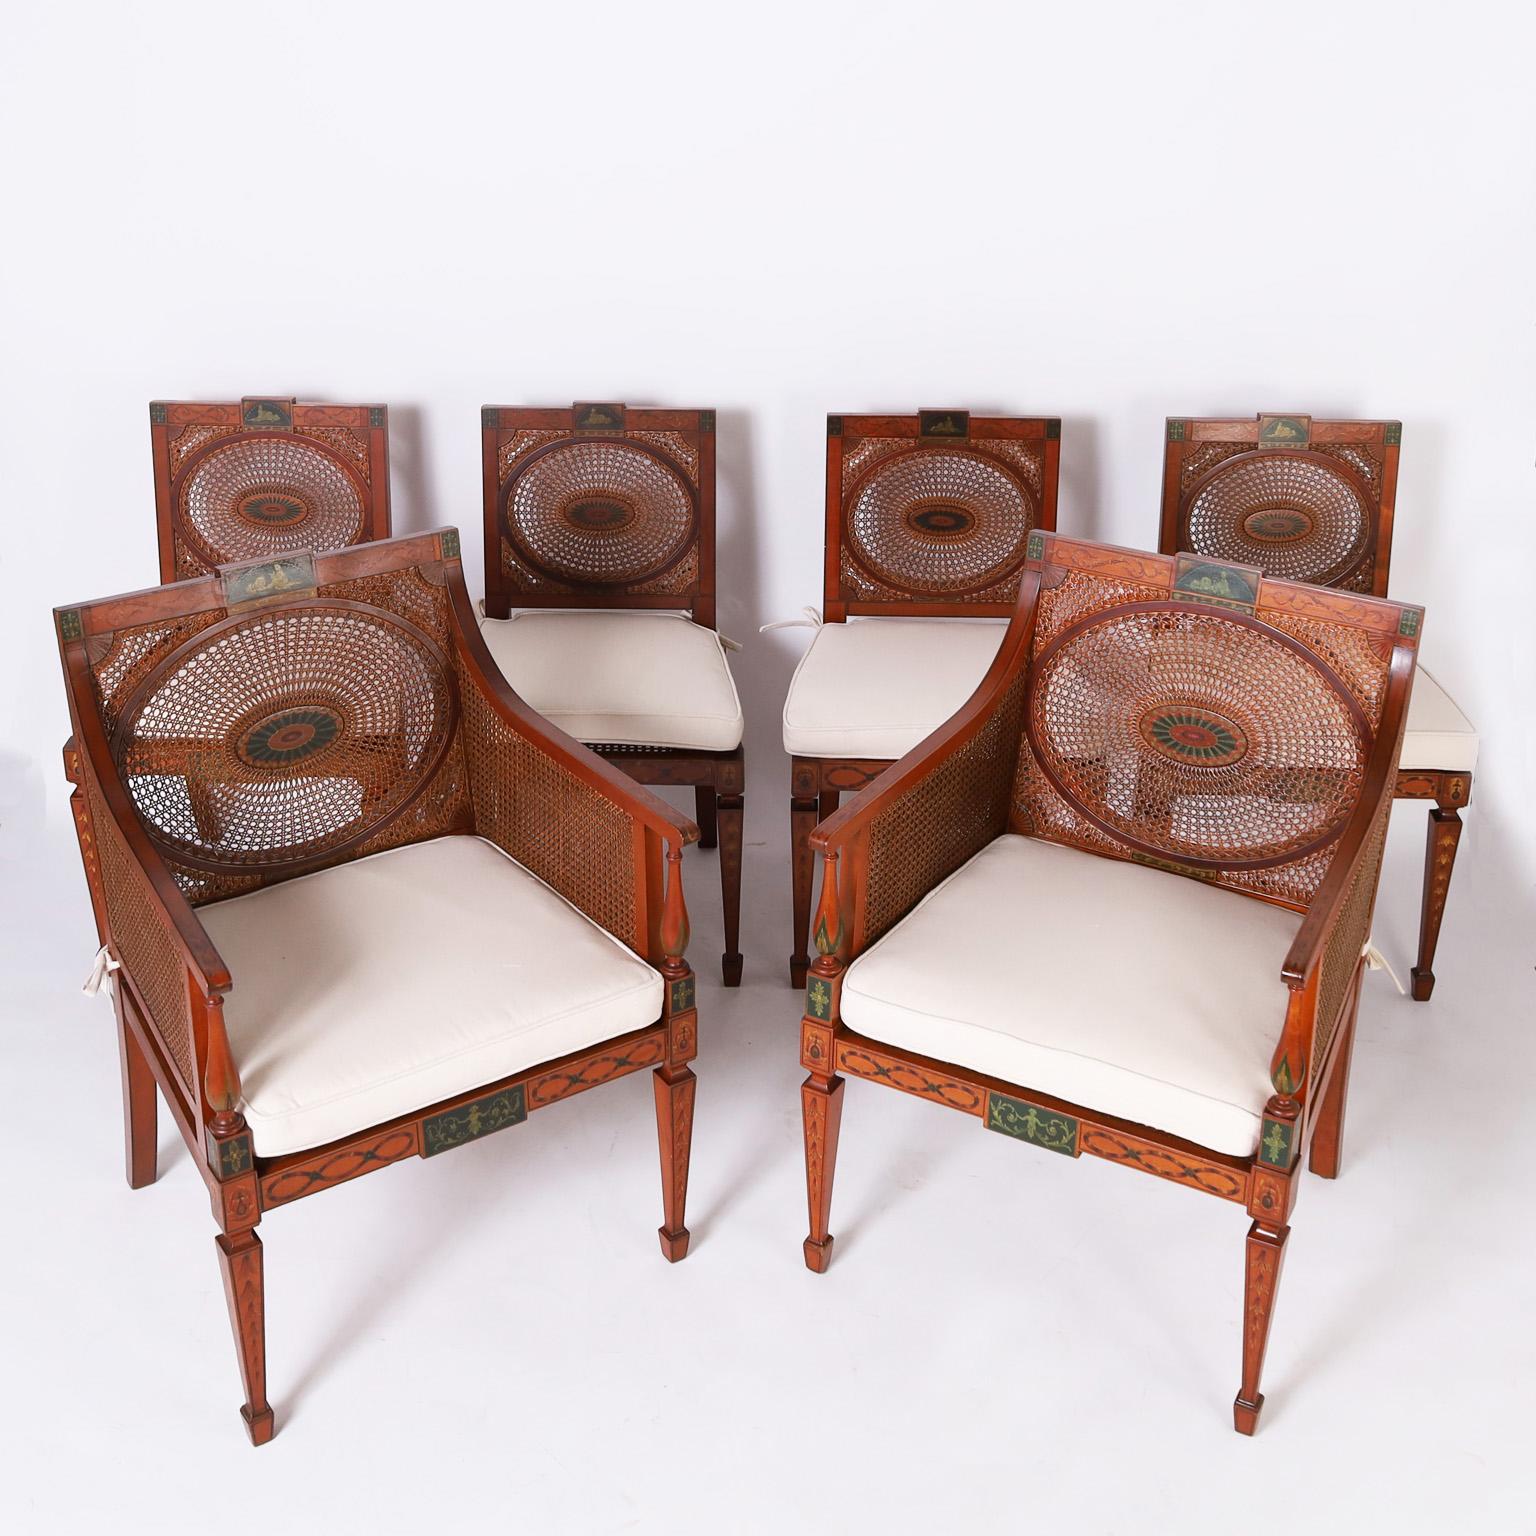 Impressive set of six dining chairs having two armchairs and four sides, crafted with mahogany in a neoclassic Adam style with painted decorations all around, featuring caned seats, sides and backs with decorated medallions, back saber legs, and